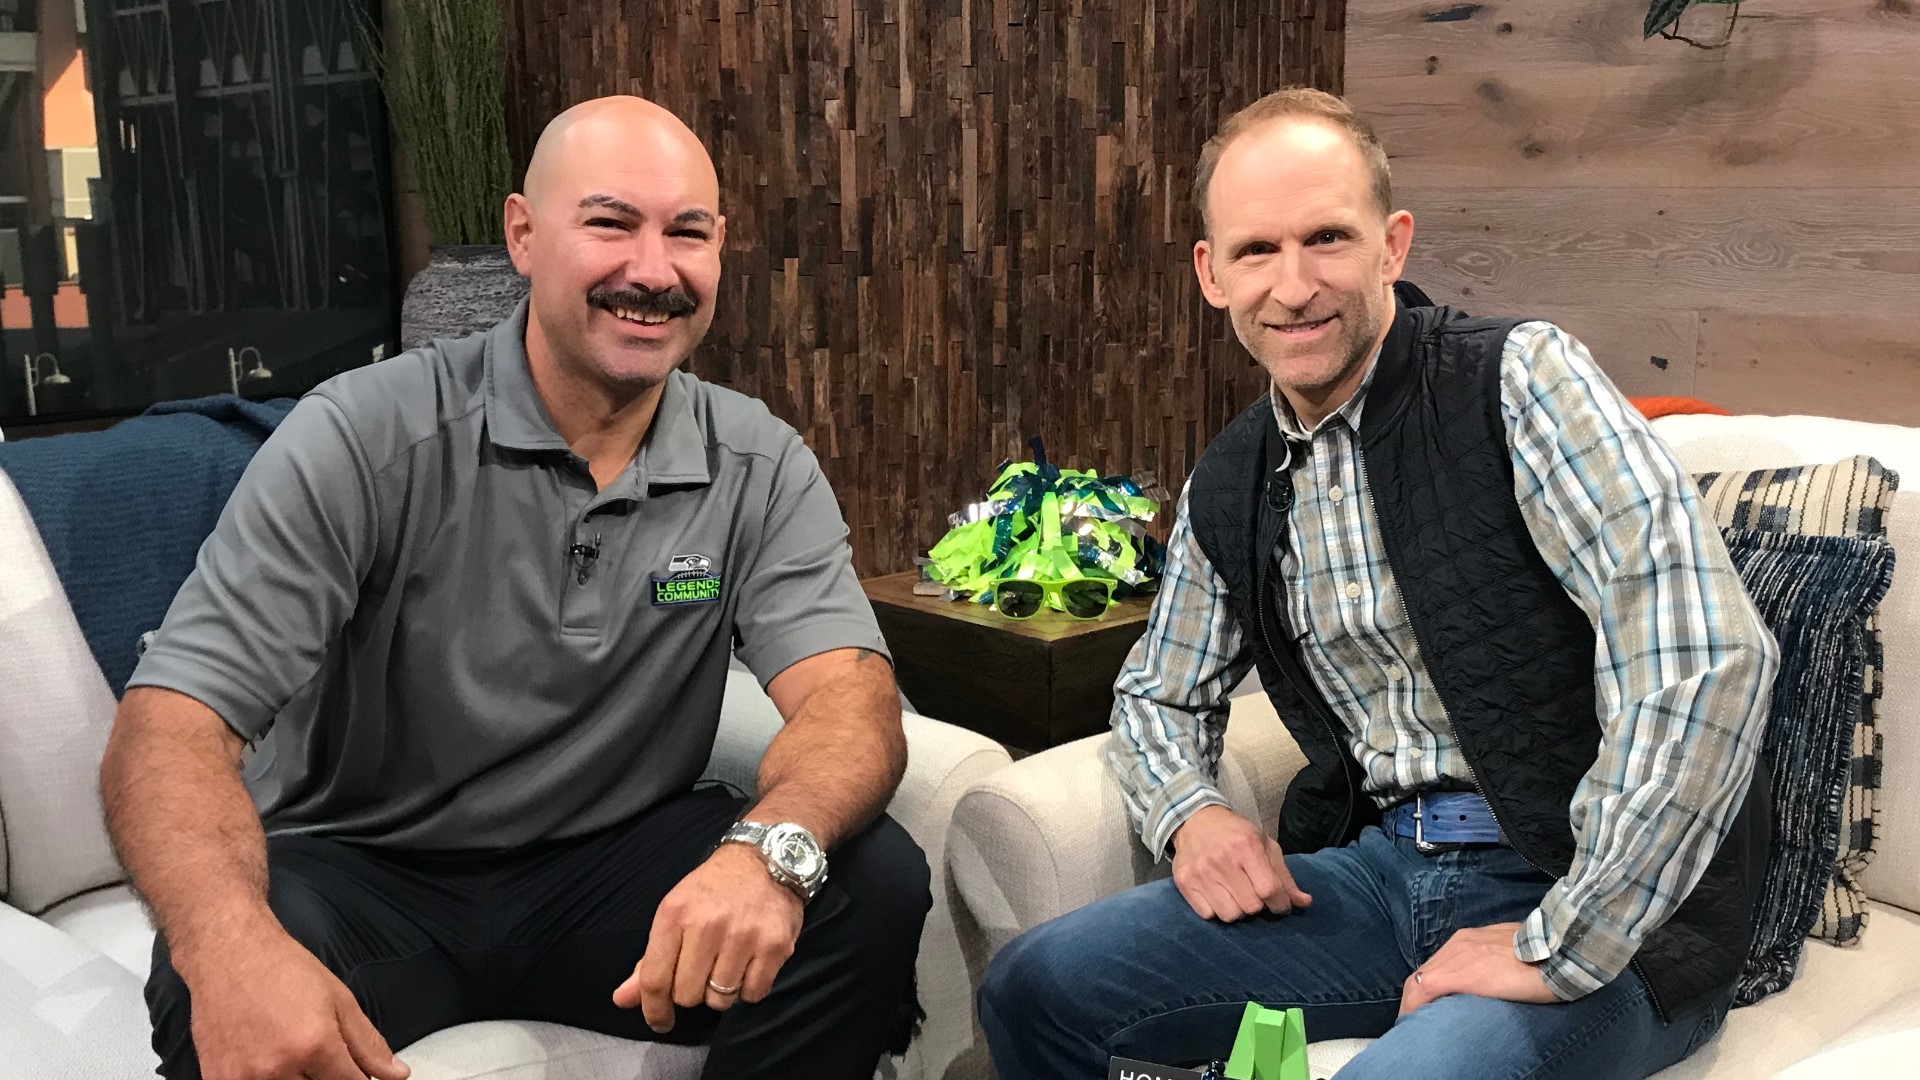 The Seahawks played their second game of the season versus the Pittsburgh Steelers and came out with a win. Joining New Day to discuss the highlights on this week's Hawk Zone is former Seahawk Joe Tafoya.